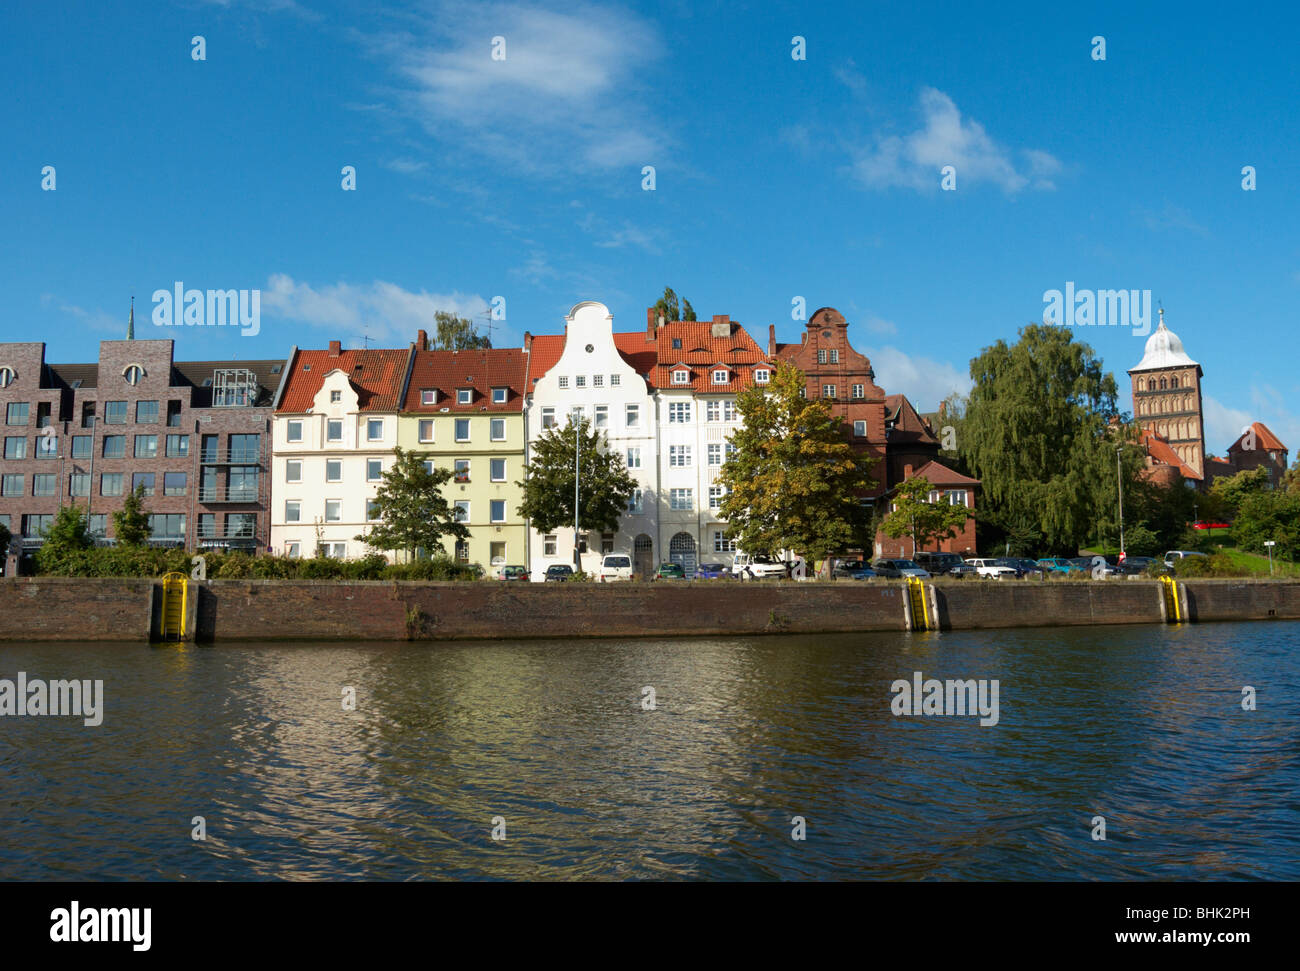 View of the old town Lubeck from the river or canal sourrounding the city. Stock Photo